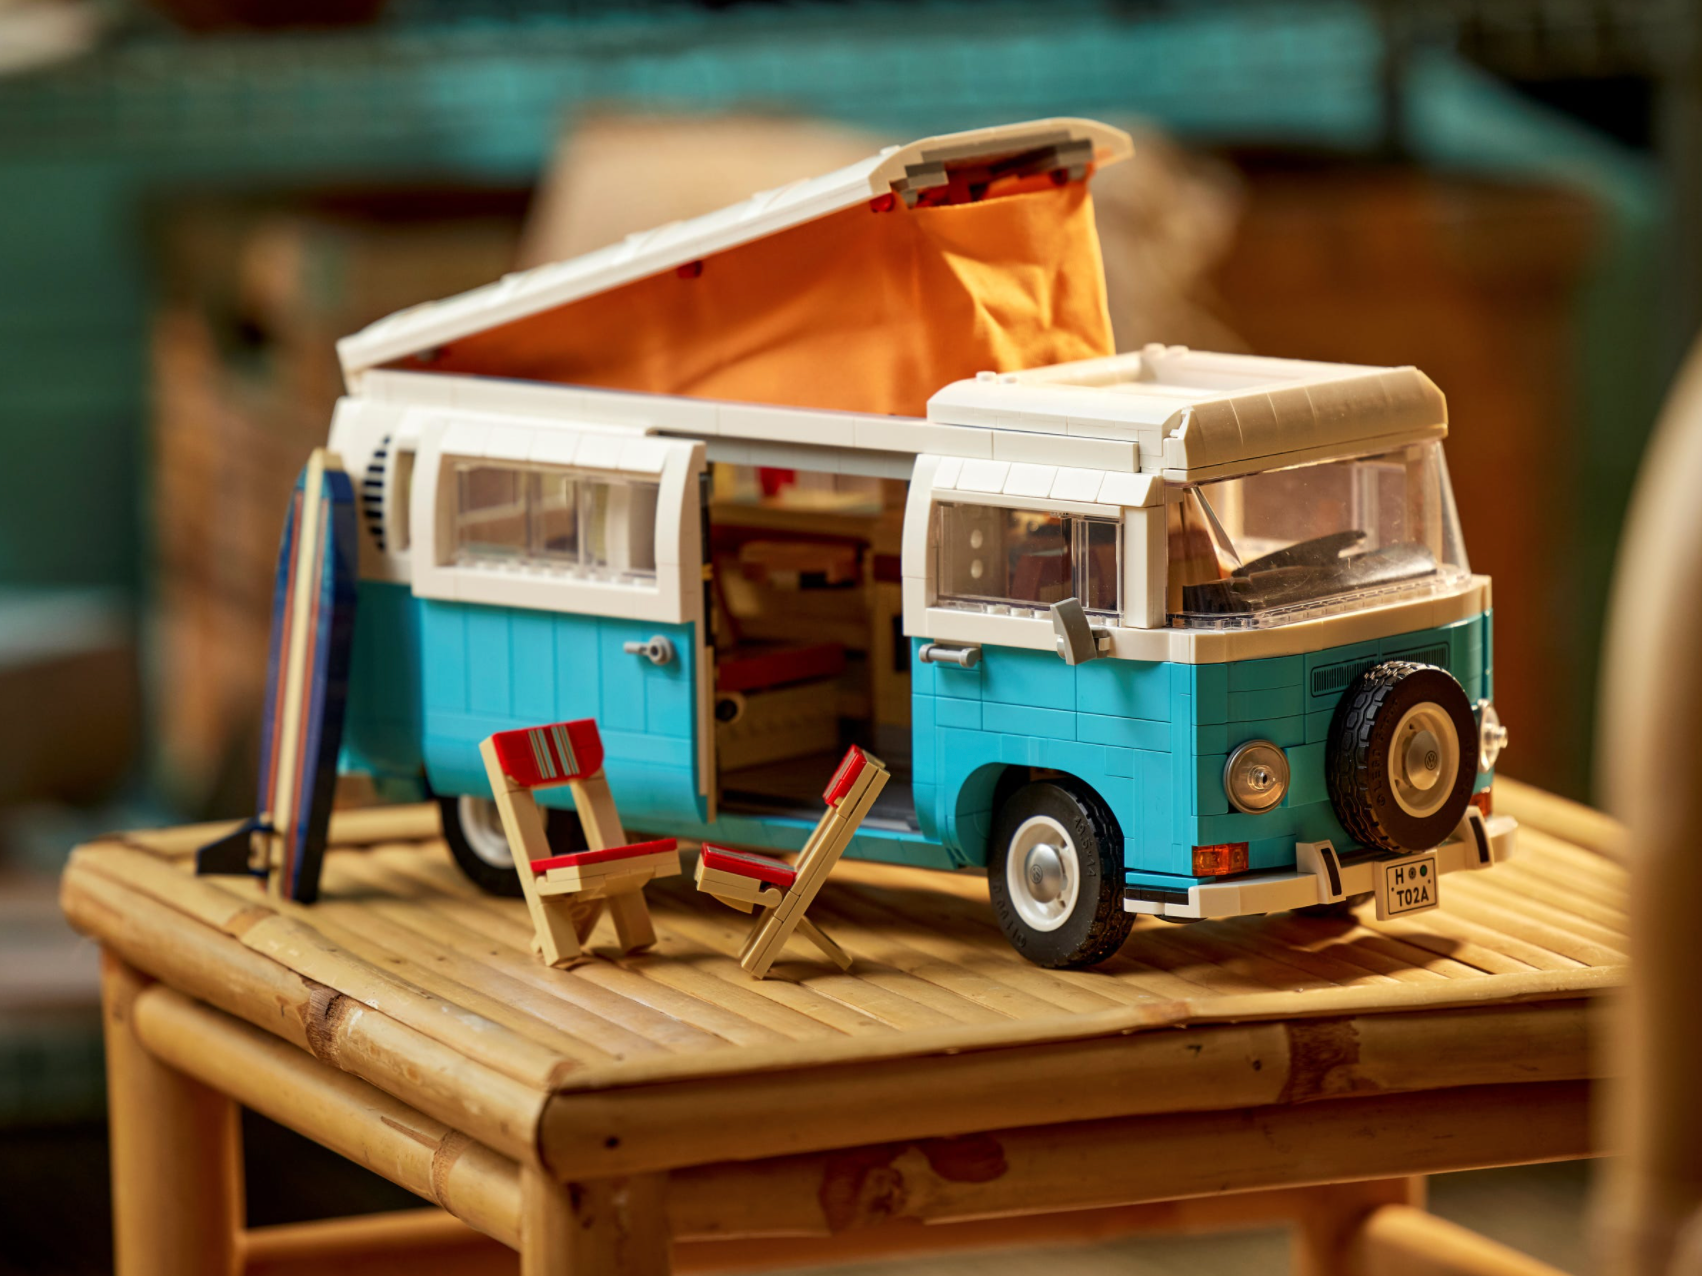 The New 2,207-Piece LEGO Volkswagen Camper Van Is Complete With a Pop-Up Tent and Surfboard